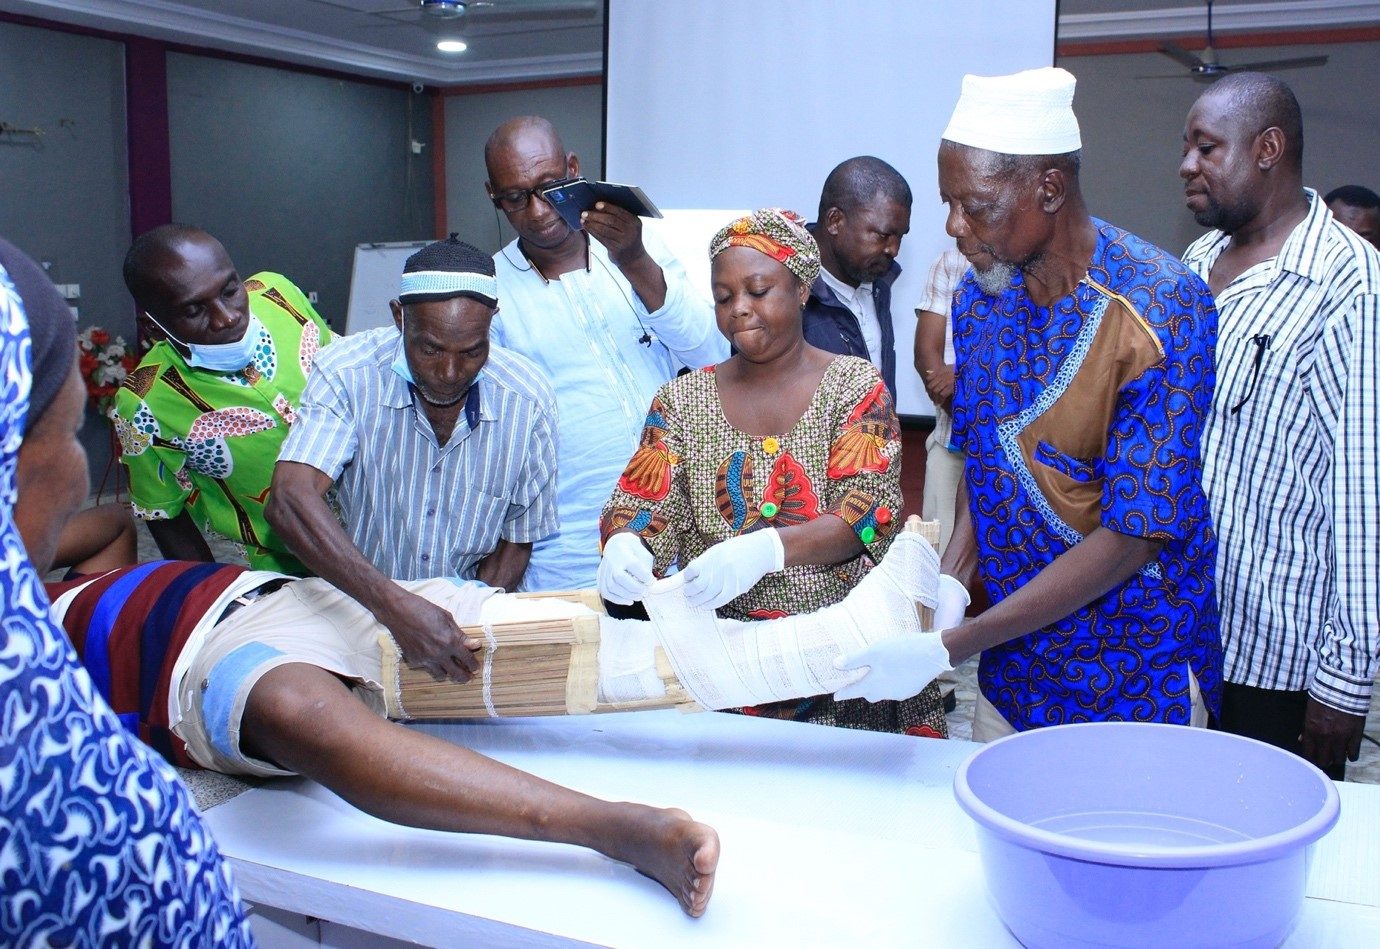 Catalyzing health systems change: Training traditional bonesetters in Ghana